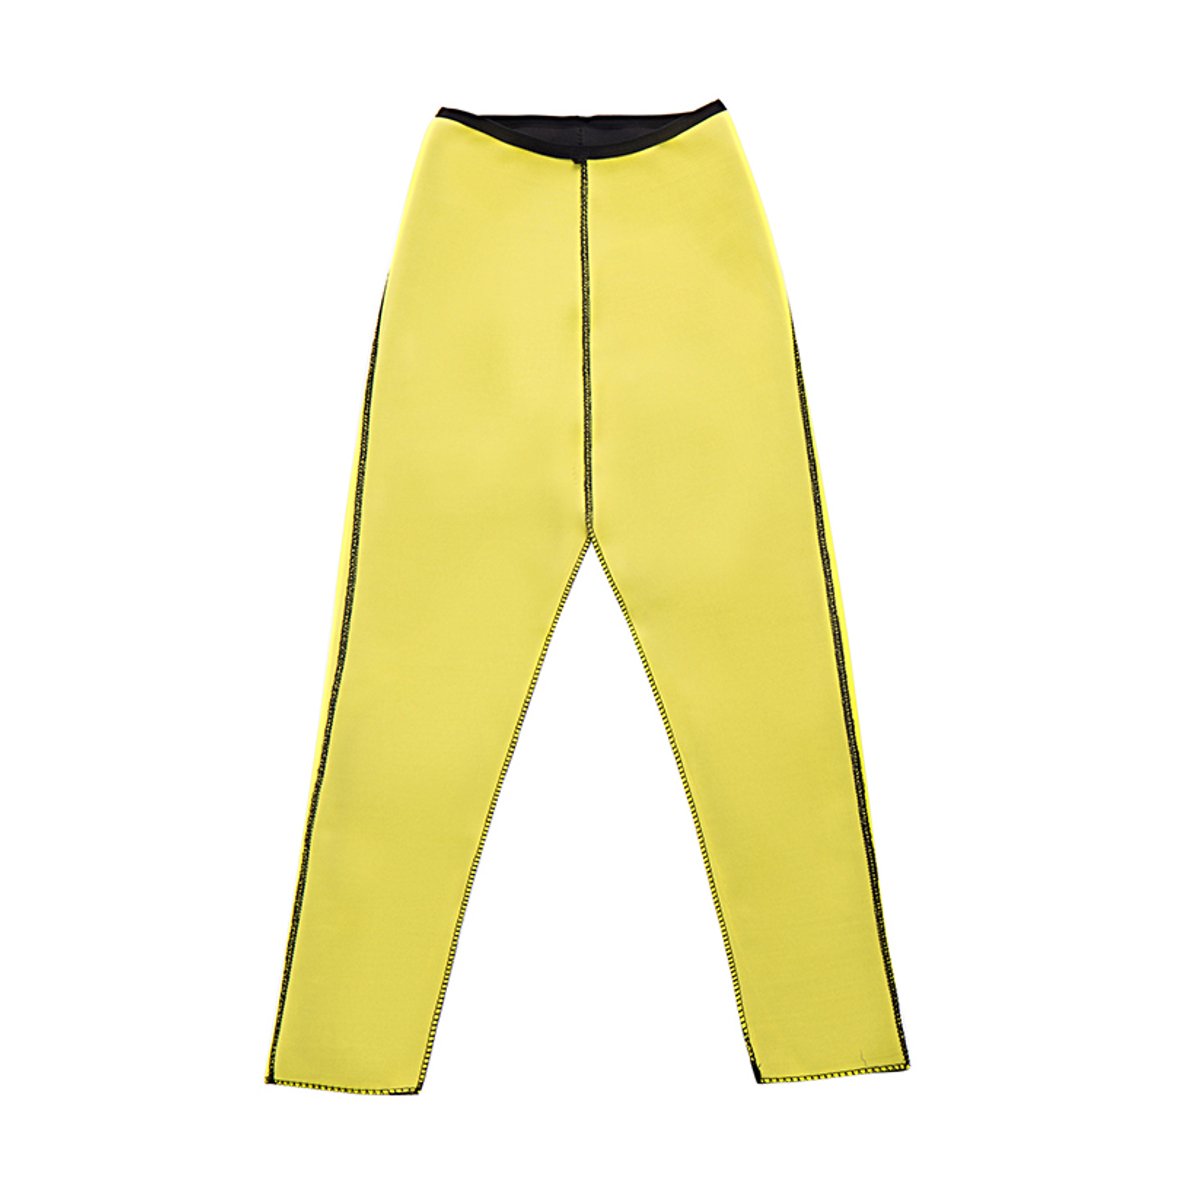 Slimming Fitness Shape Pants Accelerate Sweating